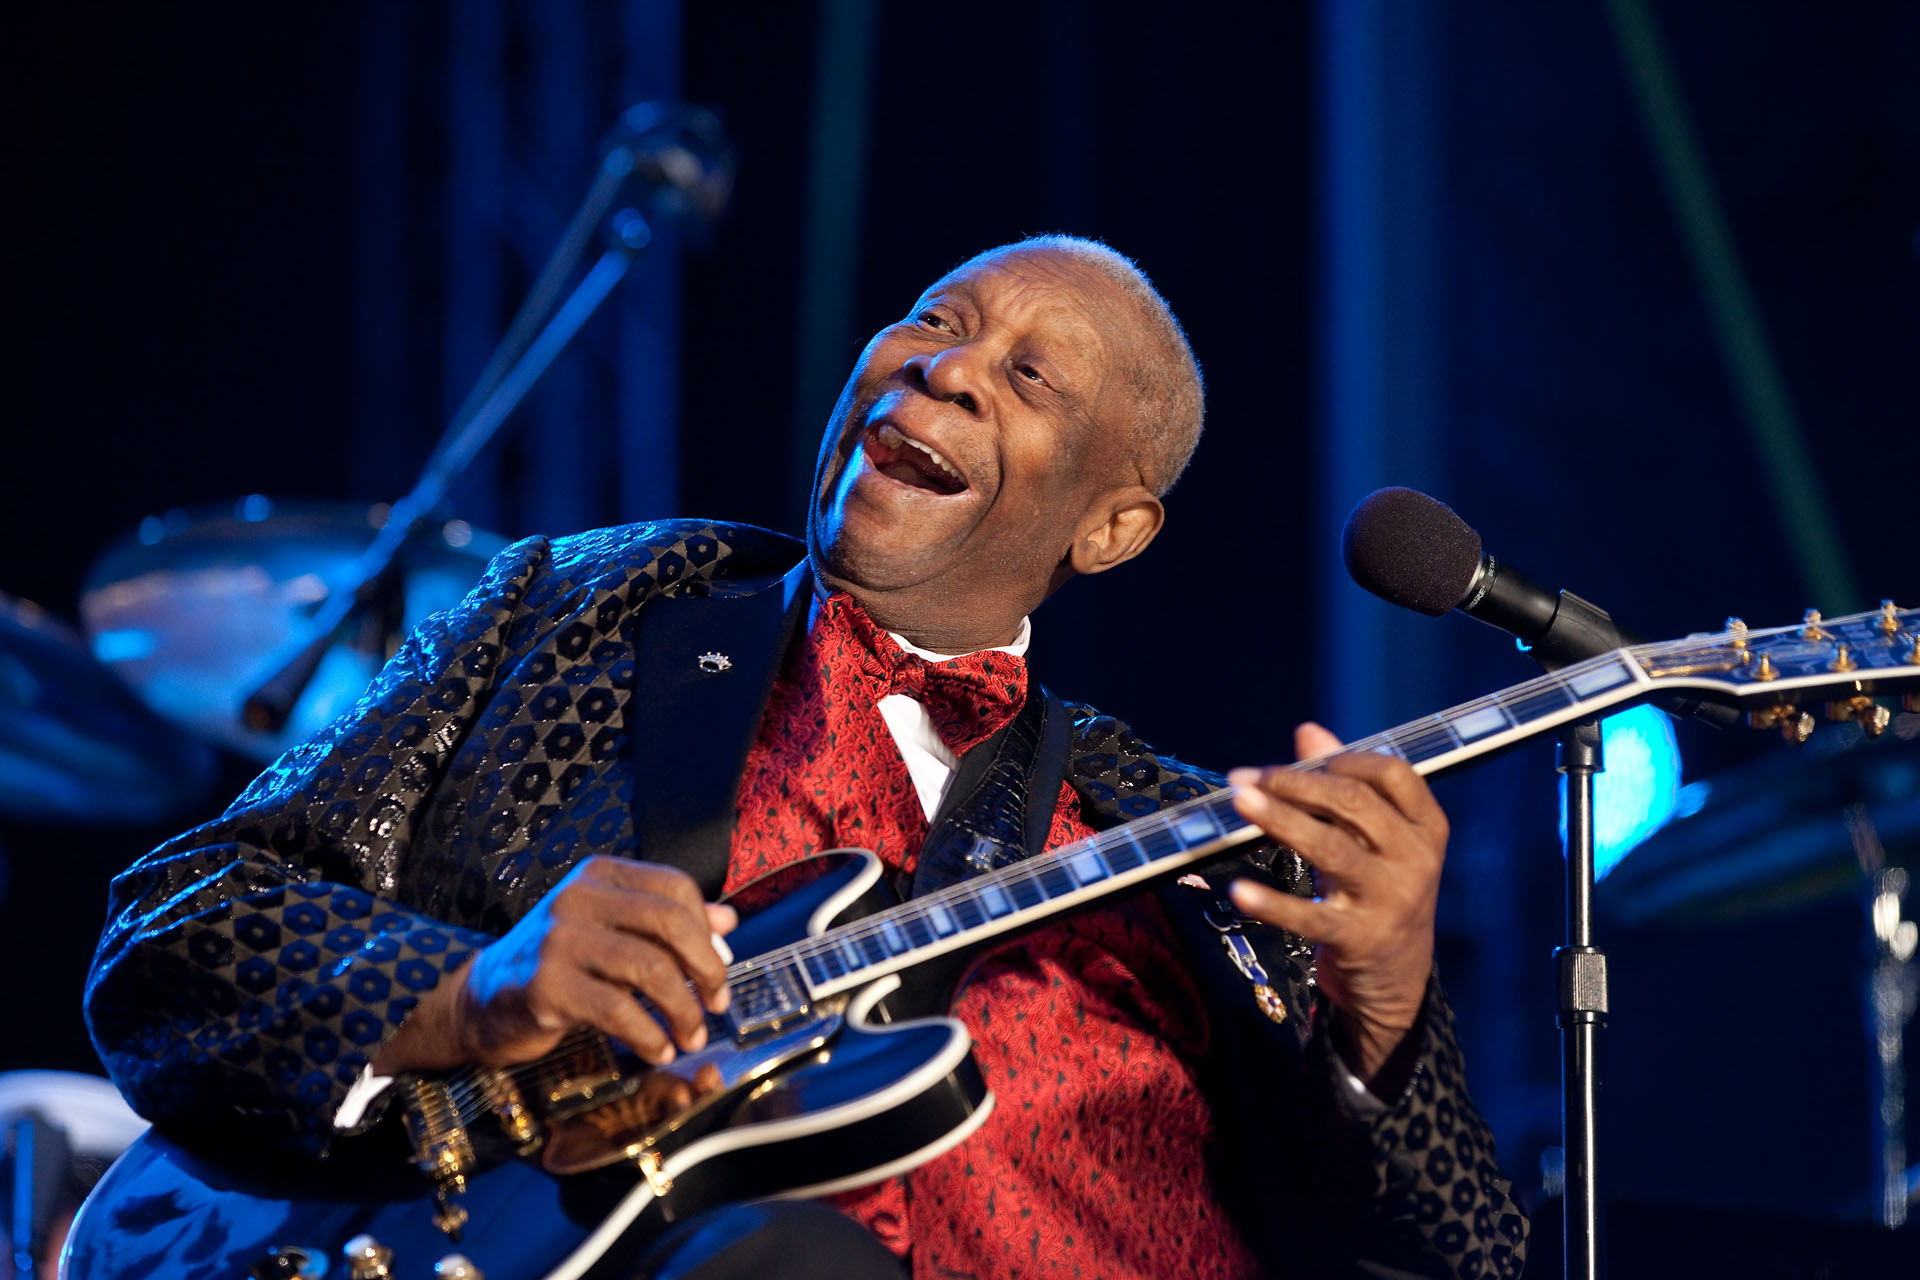 B.b.king Backgrounds, Compatible - PC, Mobile, Gadgets| 1920x1280 px